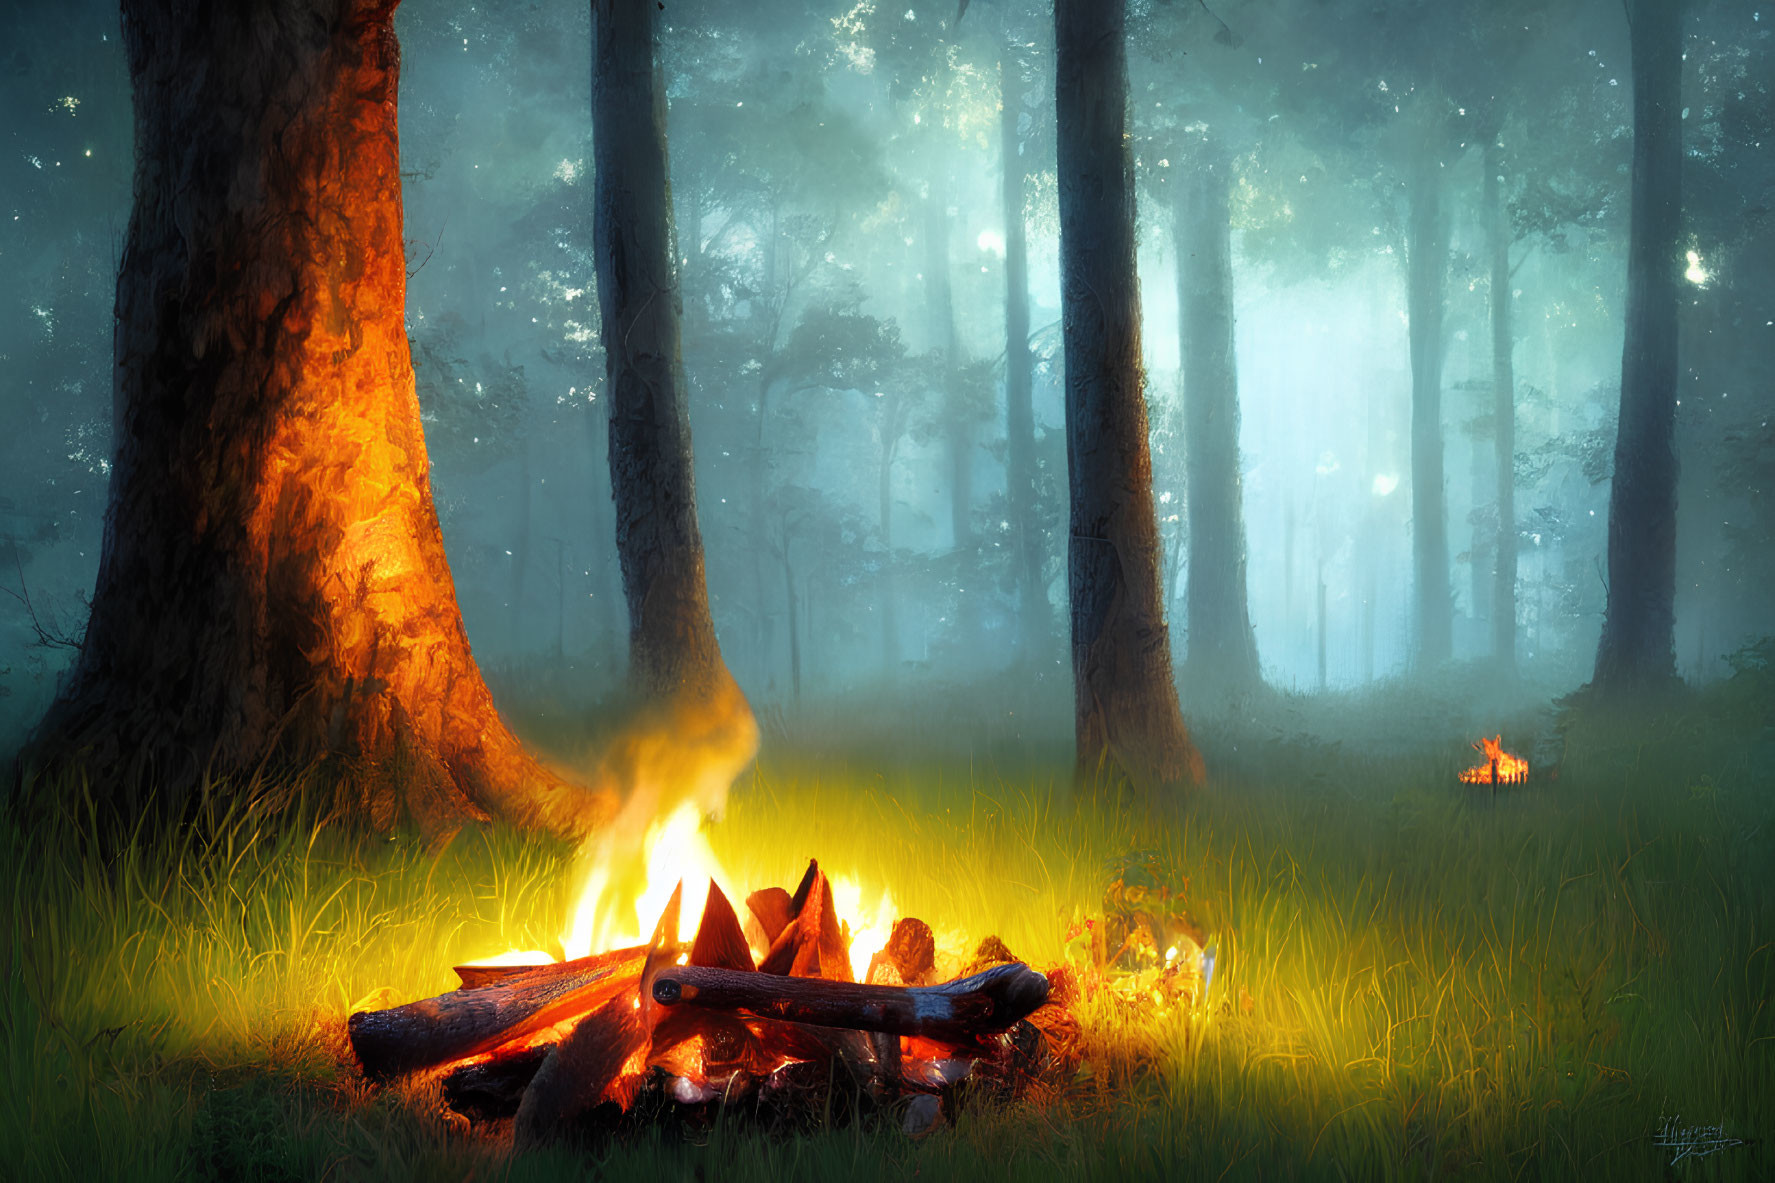 Serene misty forest with glowing campfire